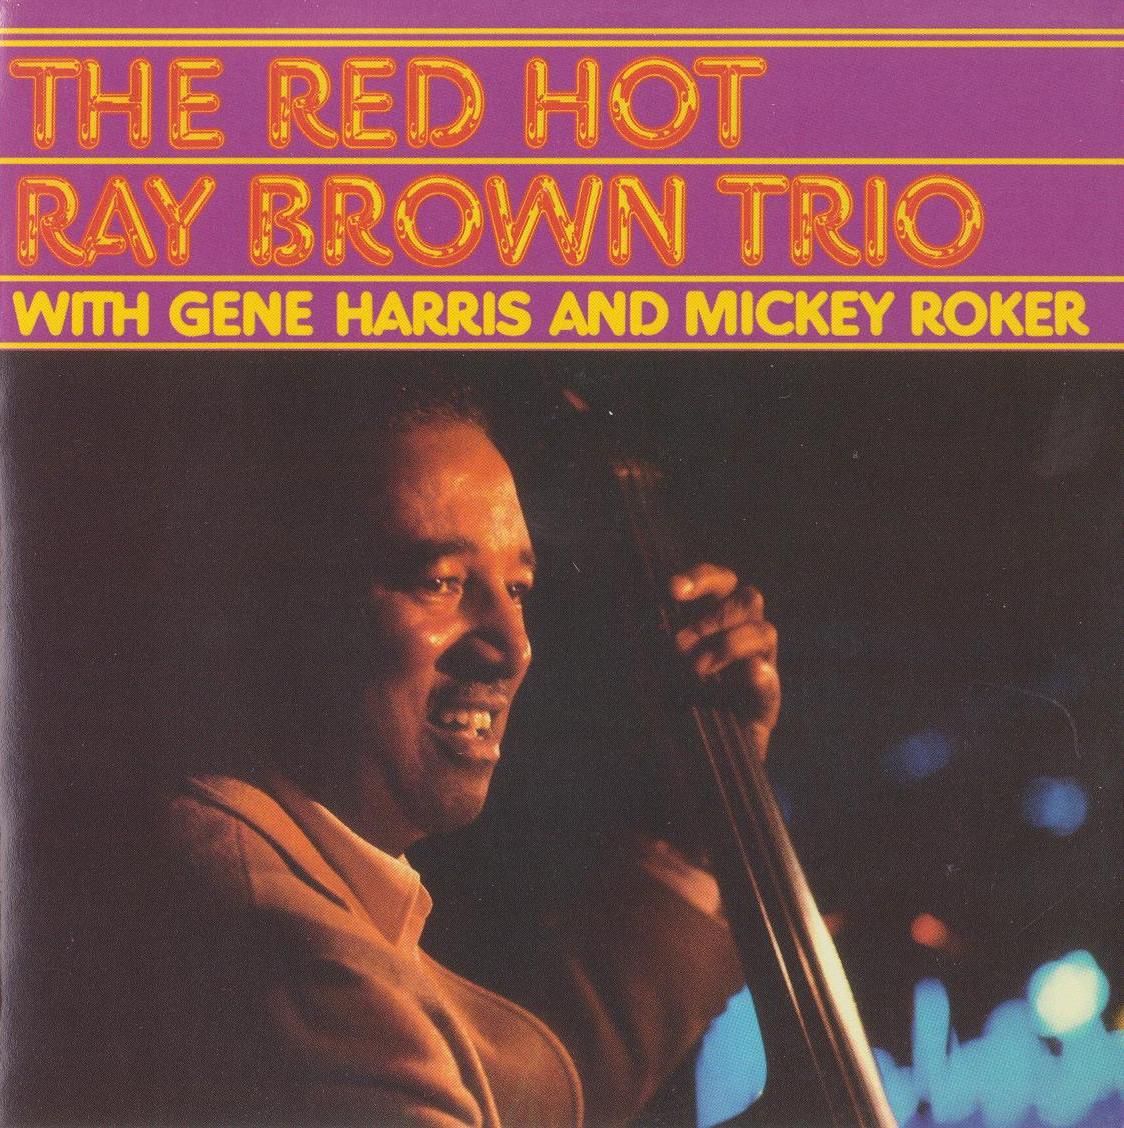 Ray Brown – The Red Hot Ray Brown Trio (1987) [Reissue 2005] SACD ISO + Hi-Res FLAC